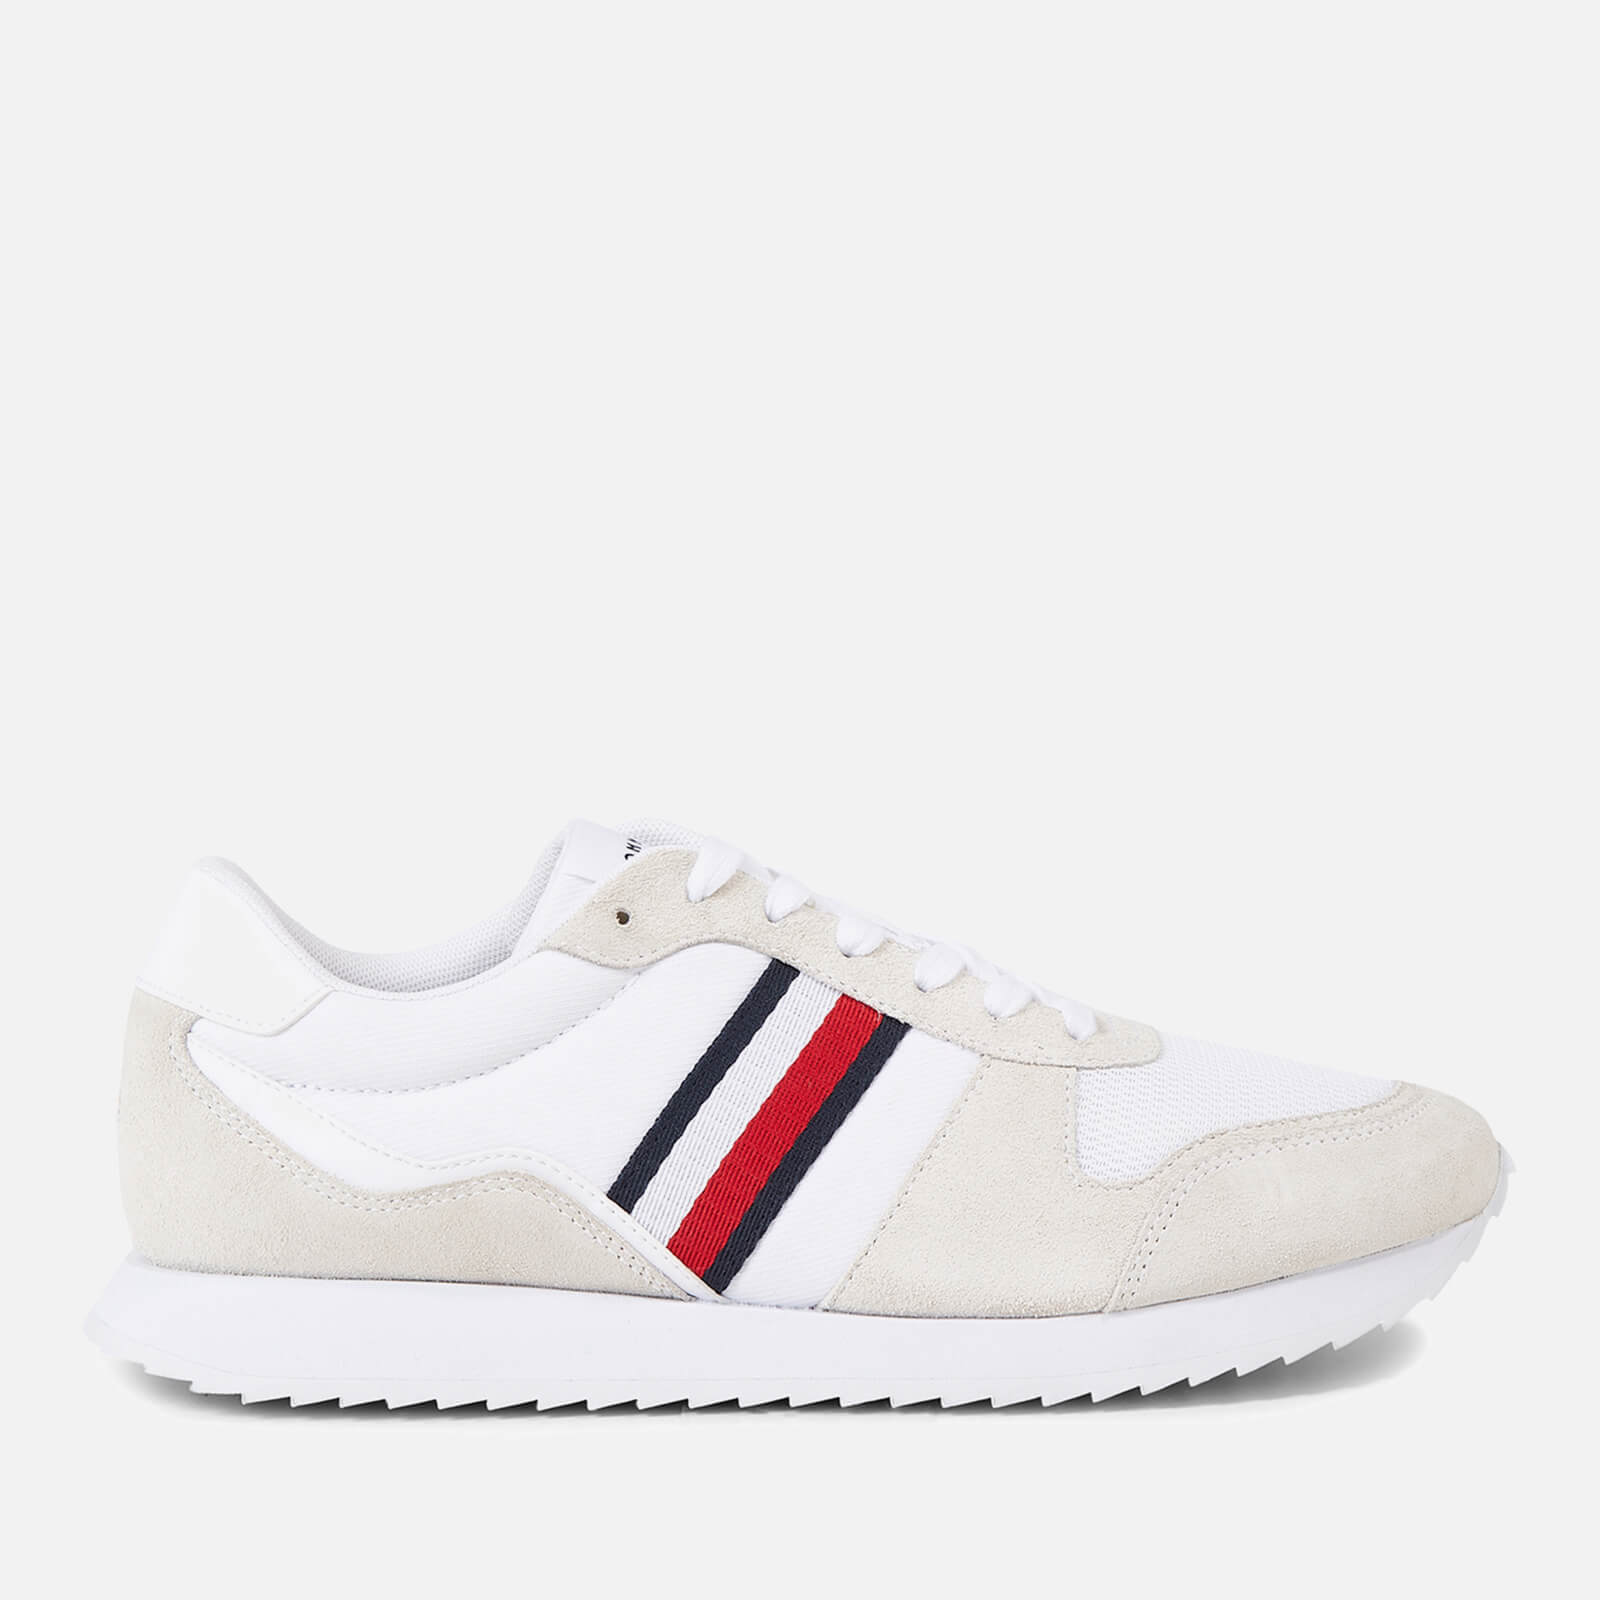 Tommy Hilfiger Men’s Evo Mix Suede, Leather and Mesh Trainers